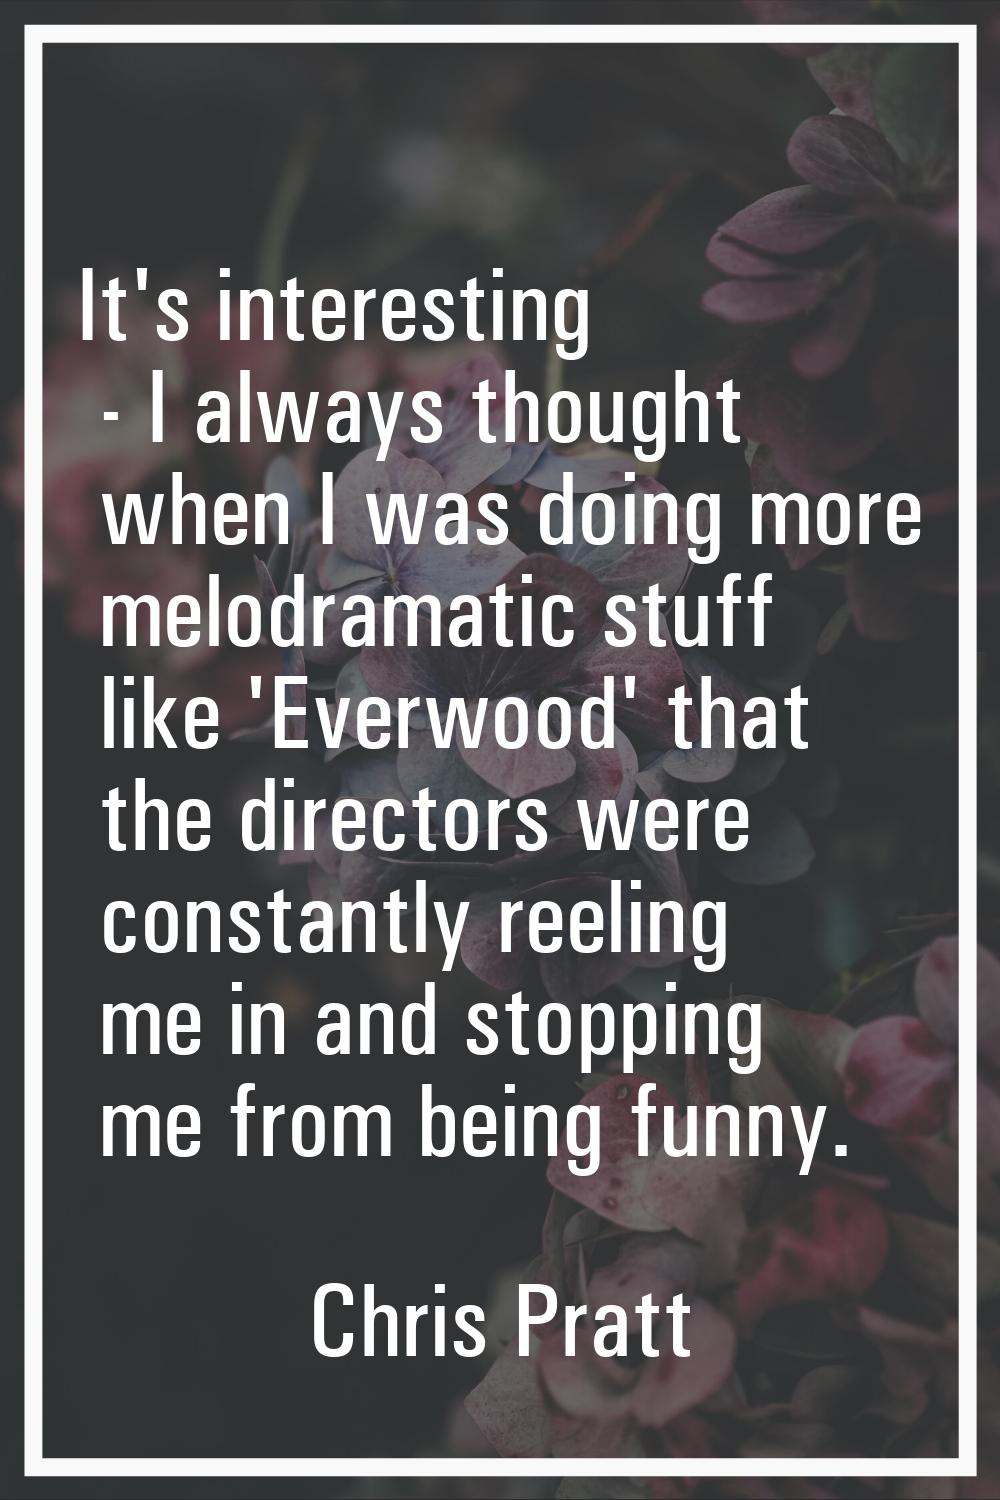 It's interesting - I always thought when I was doing more melodramatic stuff like 'Everwood' that t